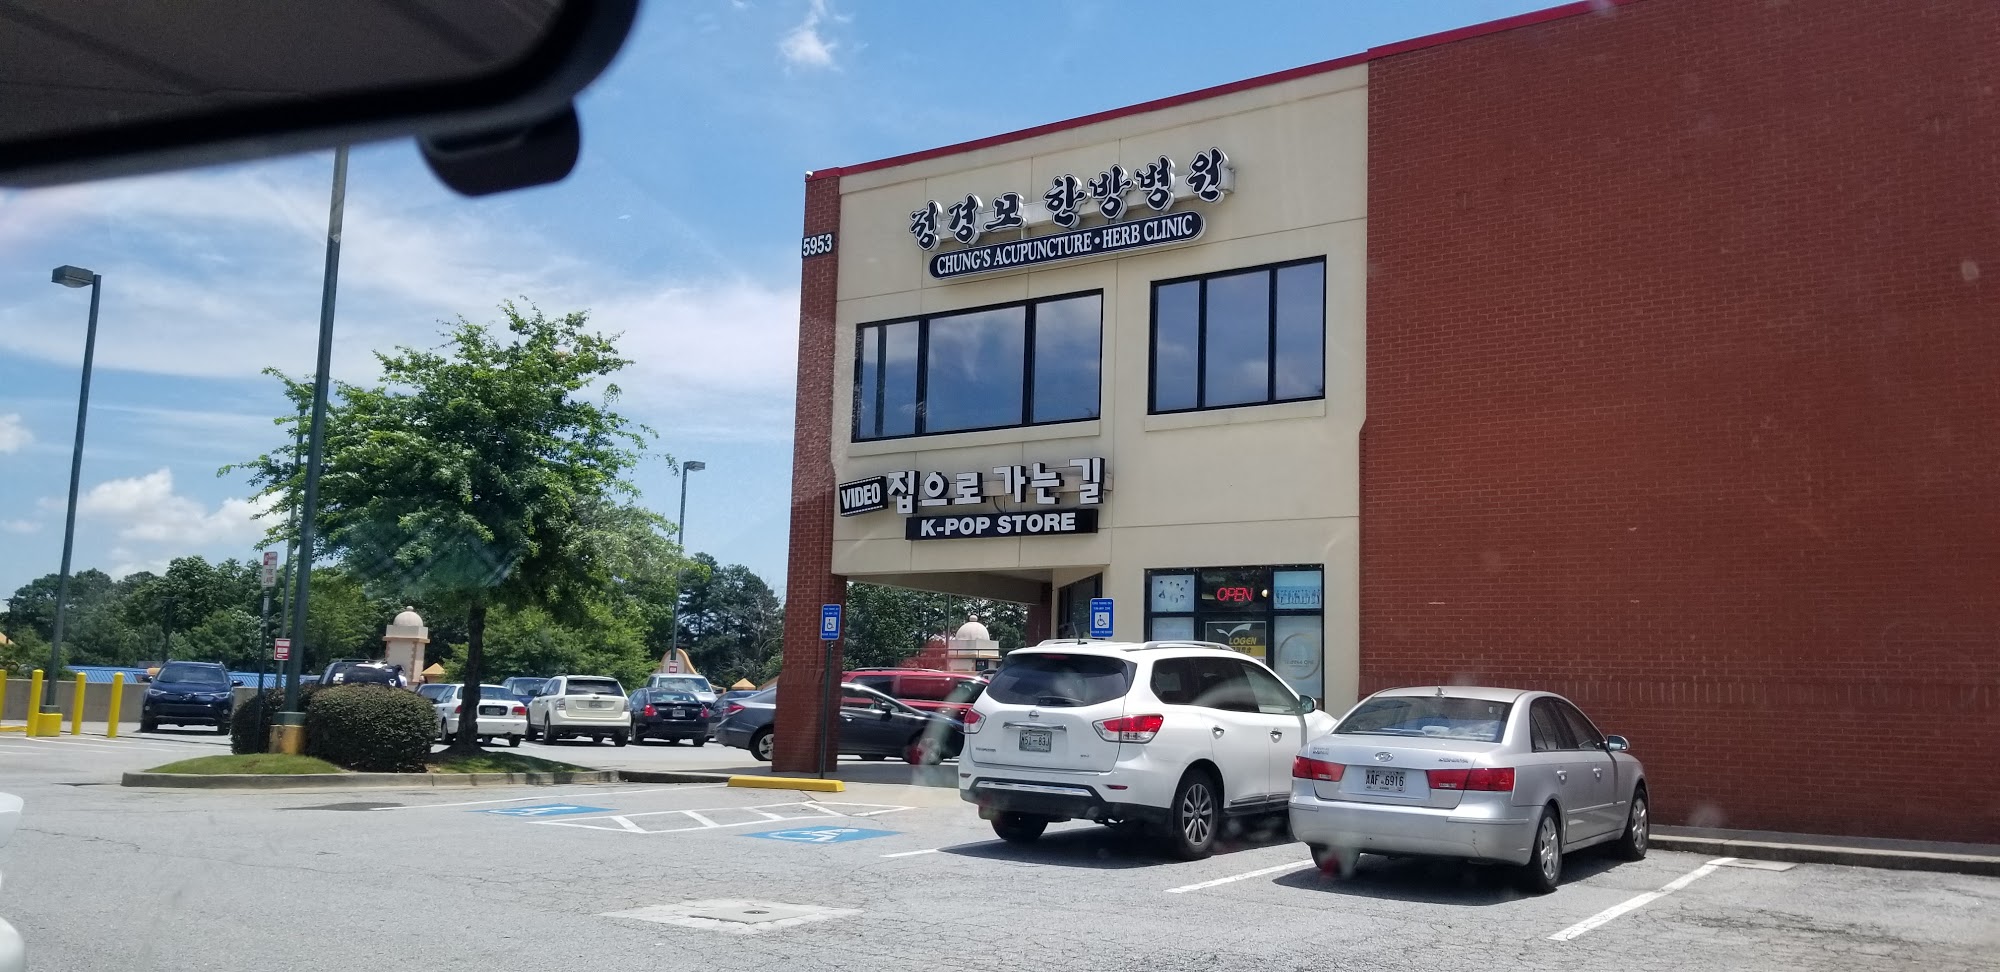 KPOP STORE in USA